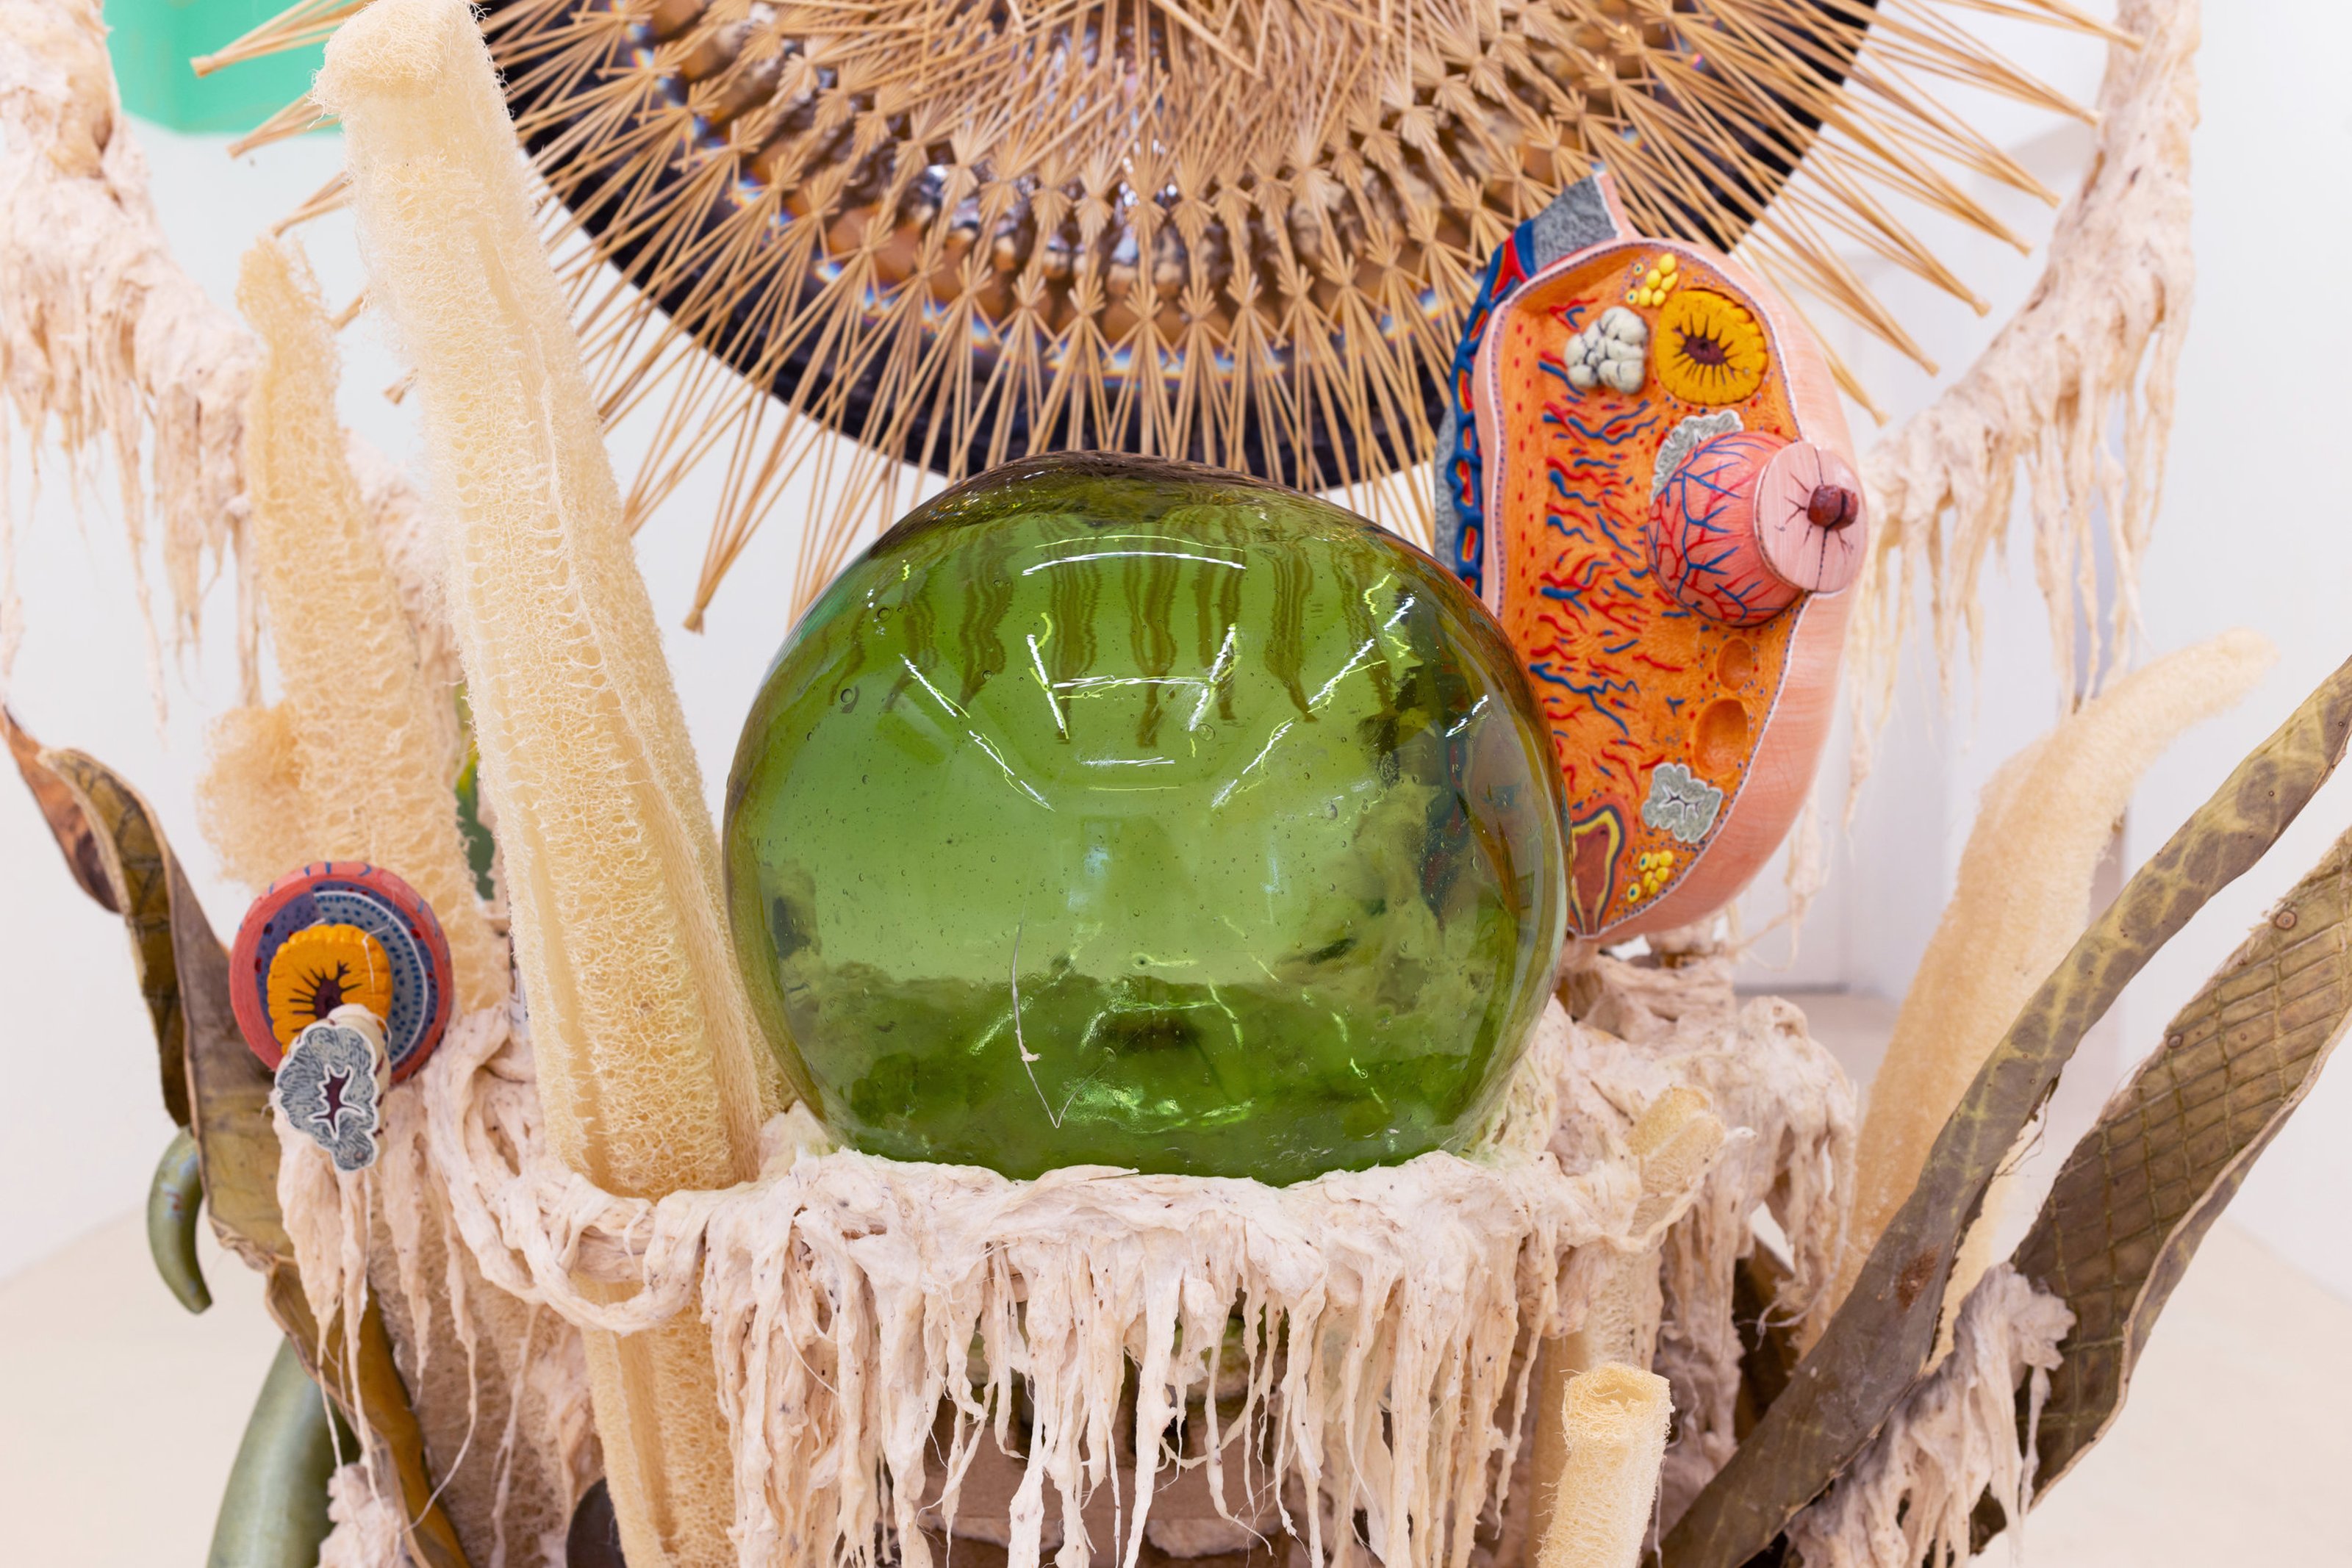 Detail of the sculpture, a green glass orb sitting on a platform, the materials around are organic and resemble body tissue